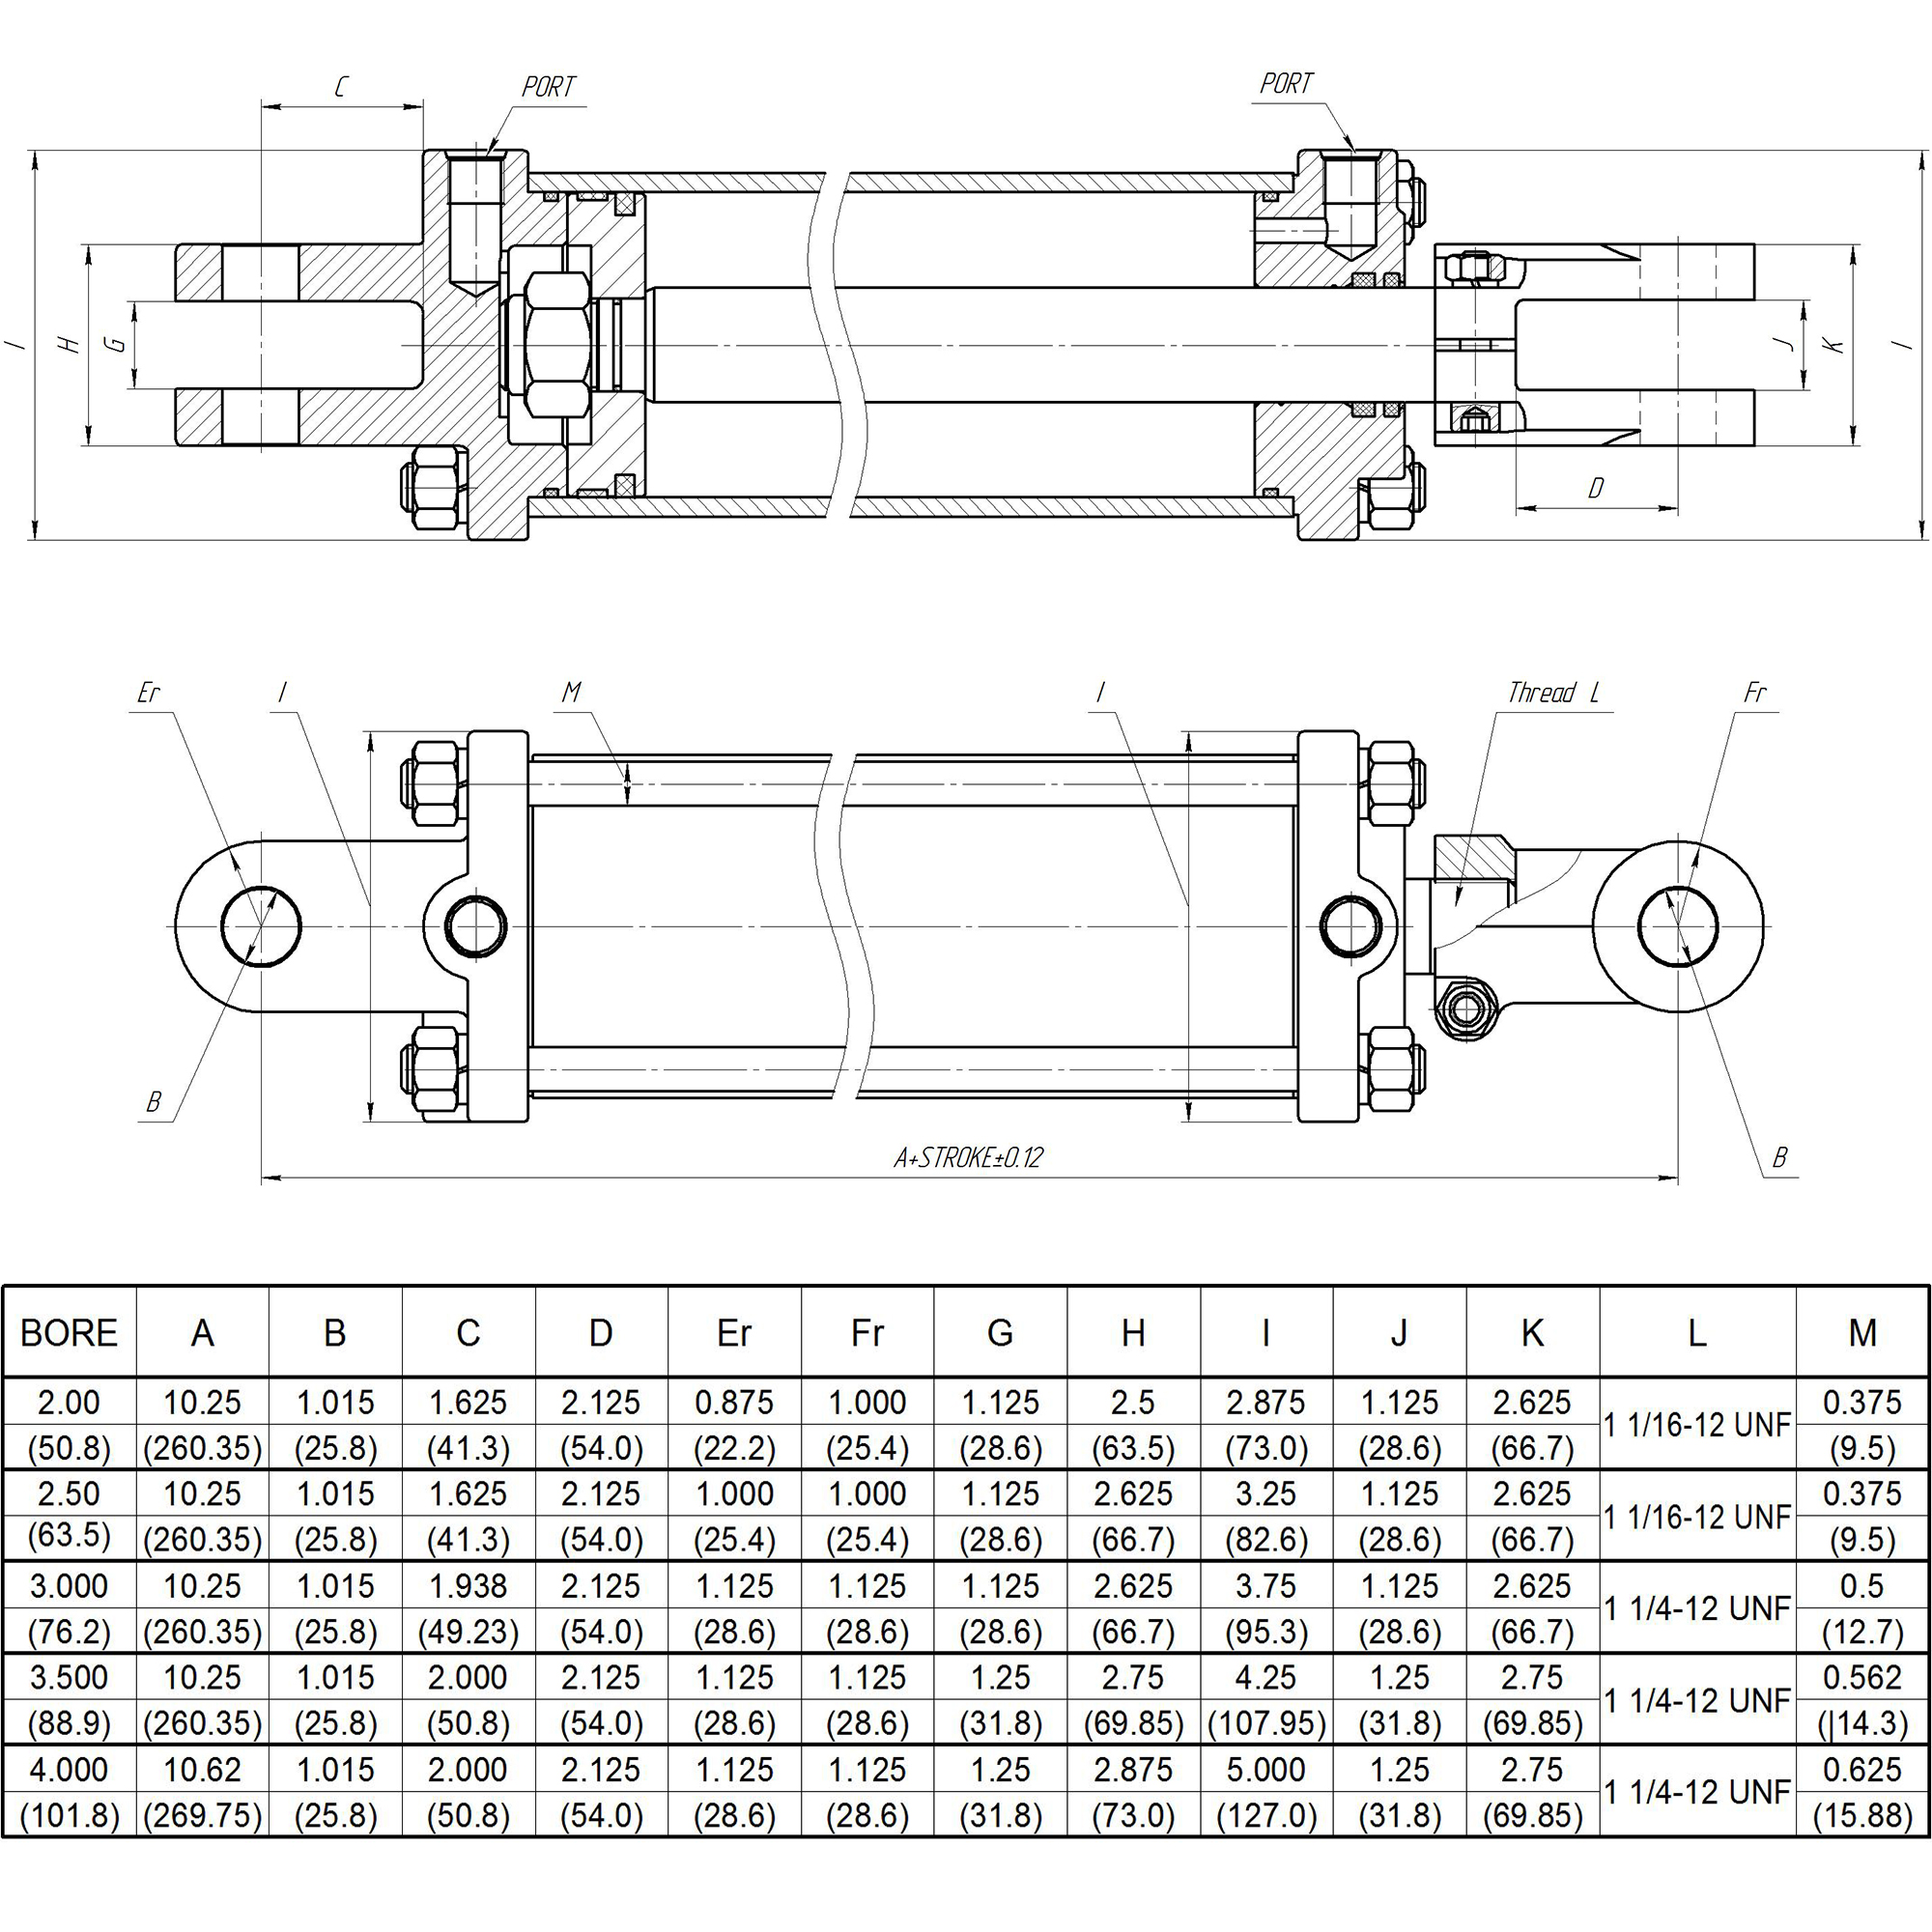 6in 3000 PSI 2in Bore Stroke Details about   New Nortrac LH Series Tie-Rod Cylinder 